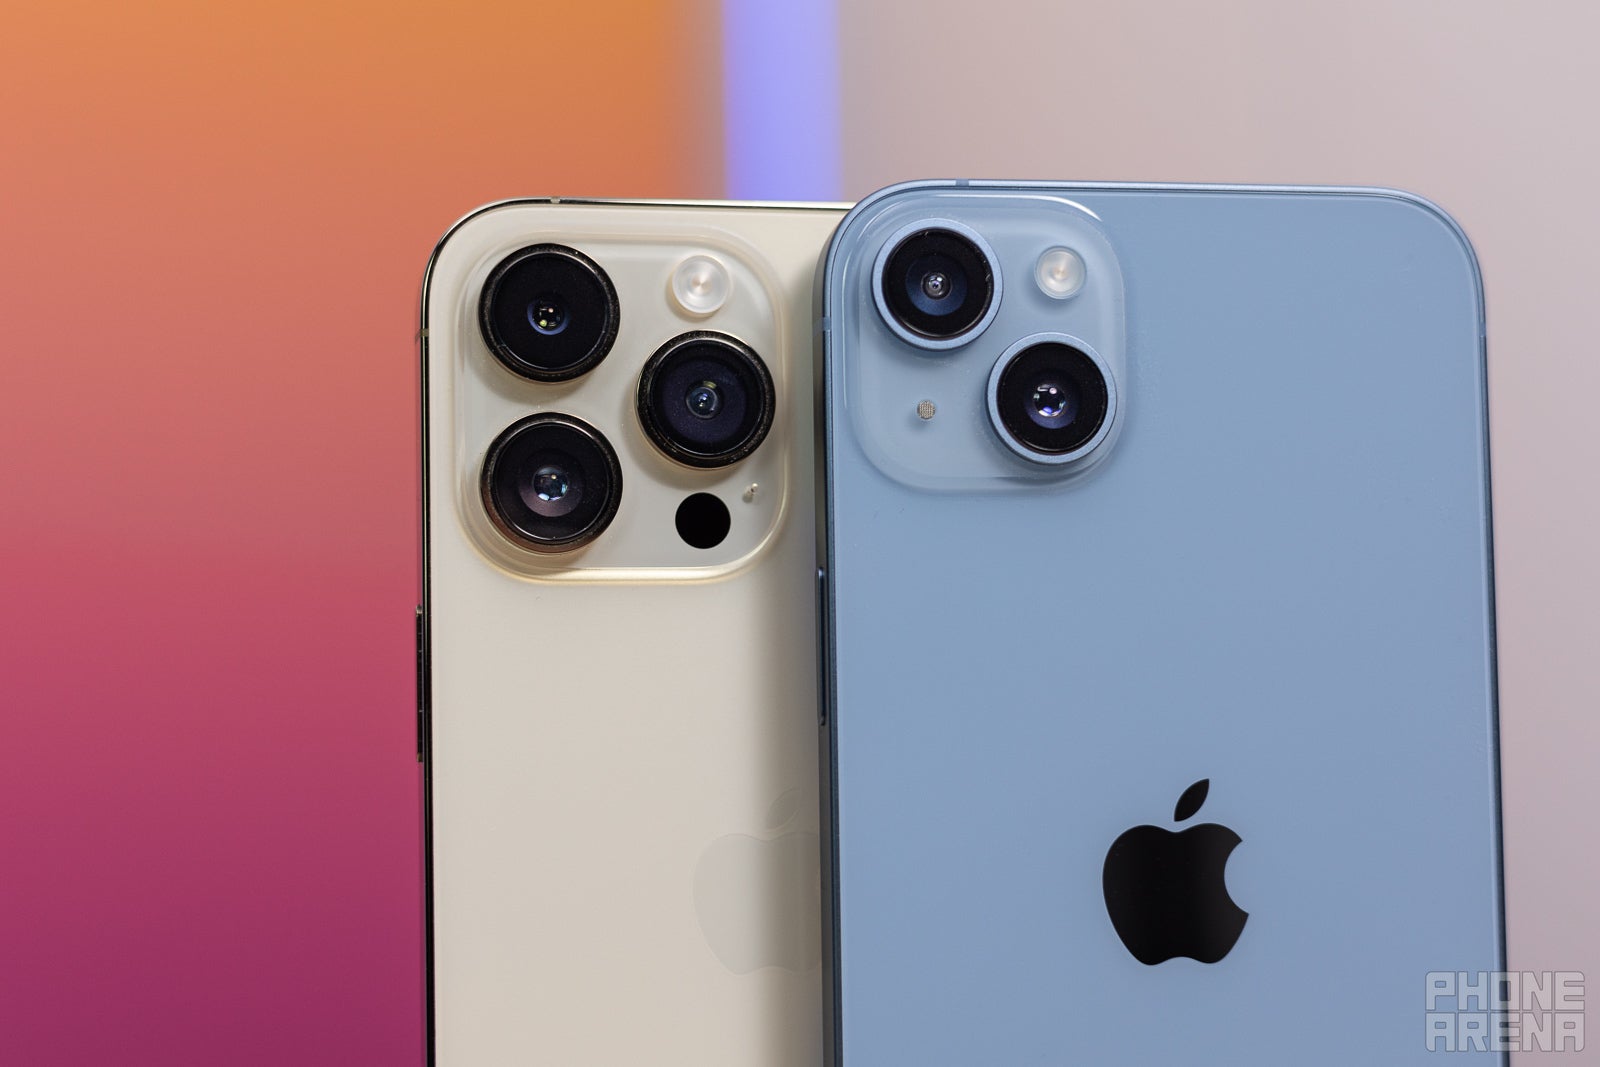 There&#039;s one extra telephoto camera on the iPhone 14 Pro Max, and it surely makes a difference in many scenarios (Image credit - PhoneArena) - iPhone 14 Pro Max vs iPhone 14 Plus: What are the differences and are they worth it?